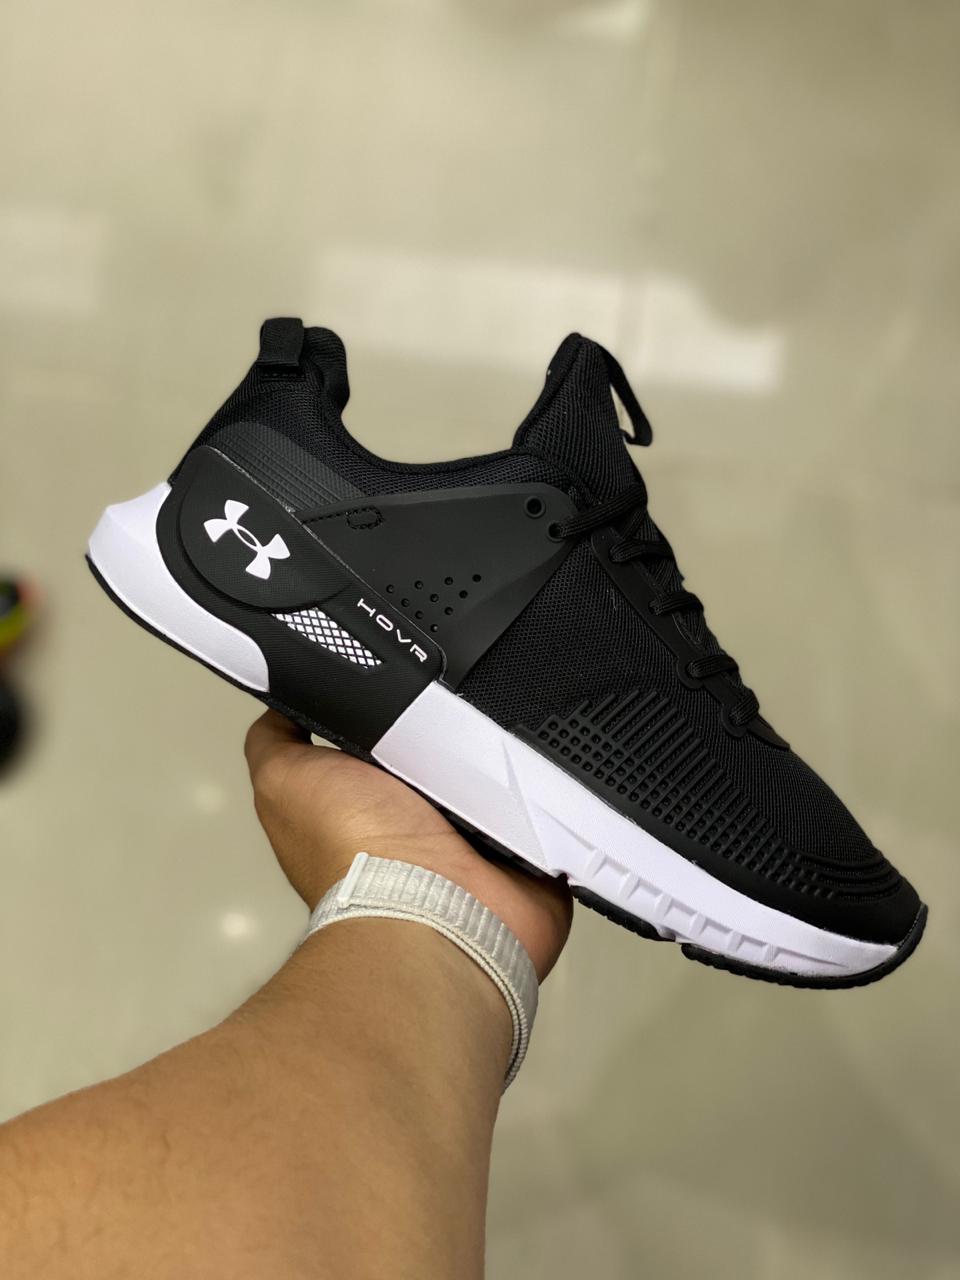 Under Armour Hovr Réplica AAA - Stand Shop Zapatillas y Sneakers Réplica AAA Colombia